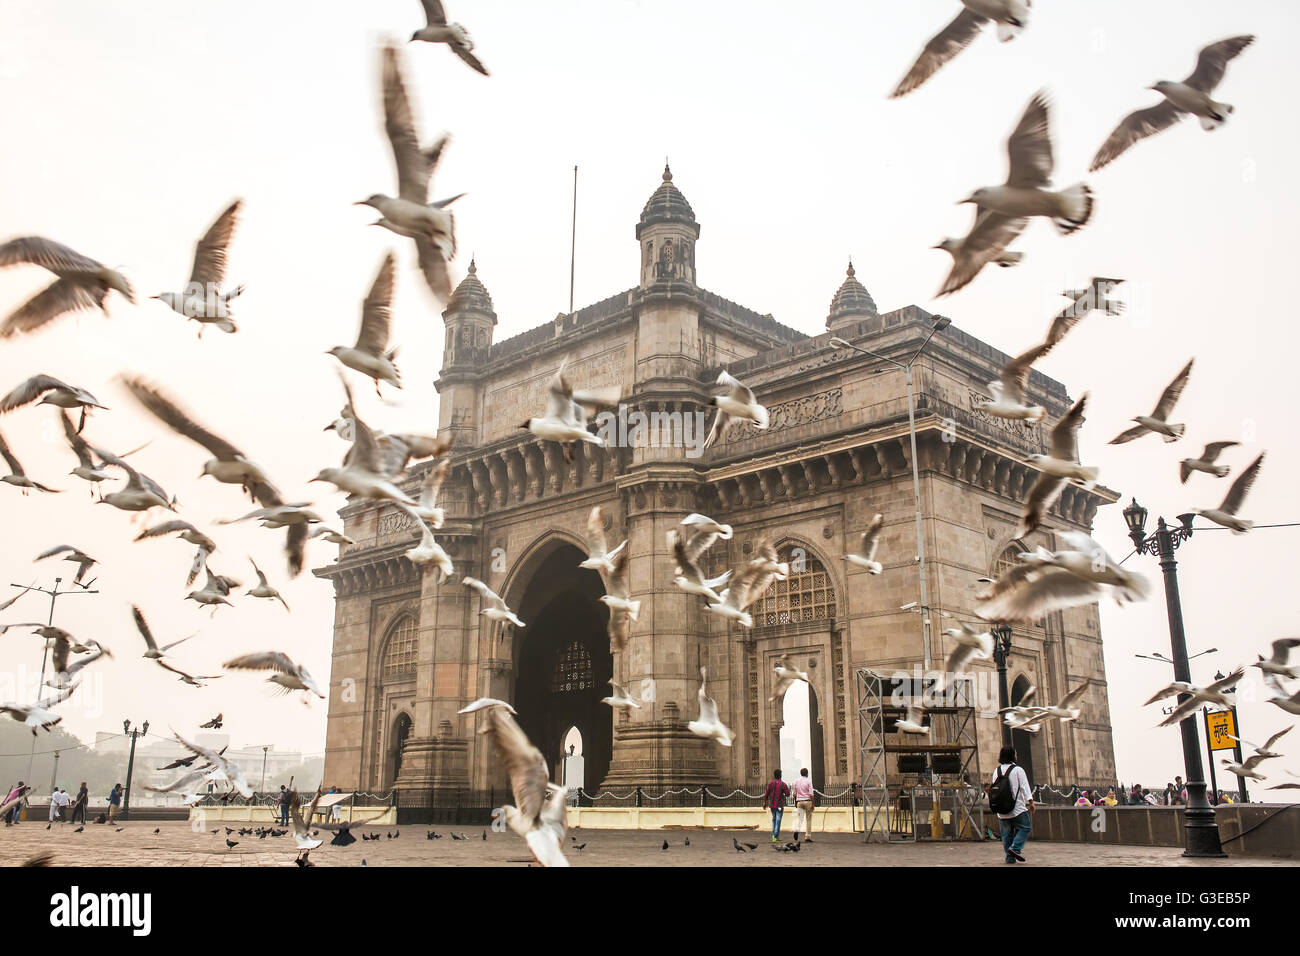 Seagulls fly in front of Gateway of India in Mumbai Stock Photo